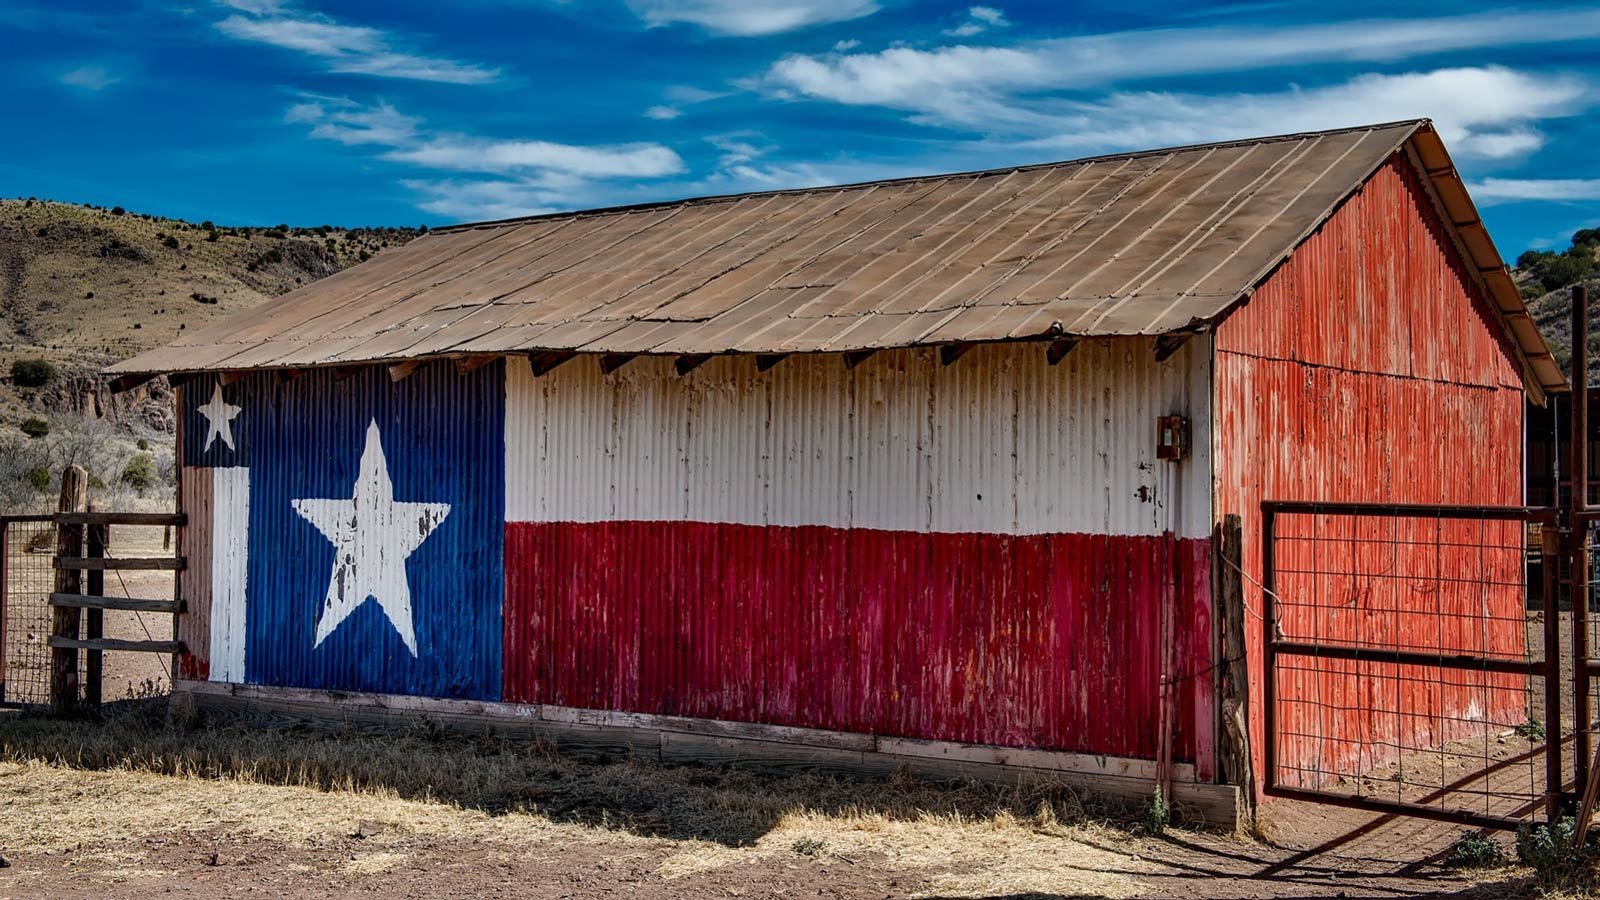 17 Interesting Facts About Texas